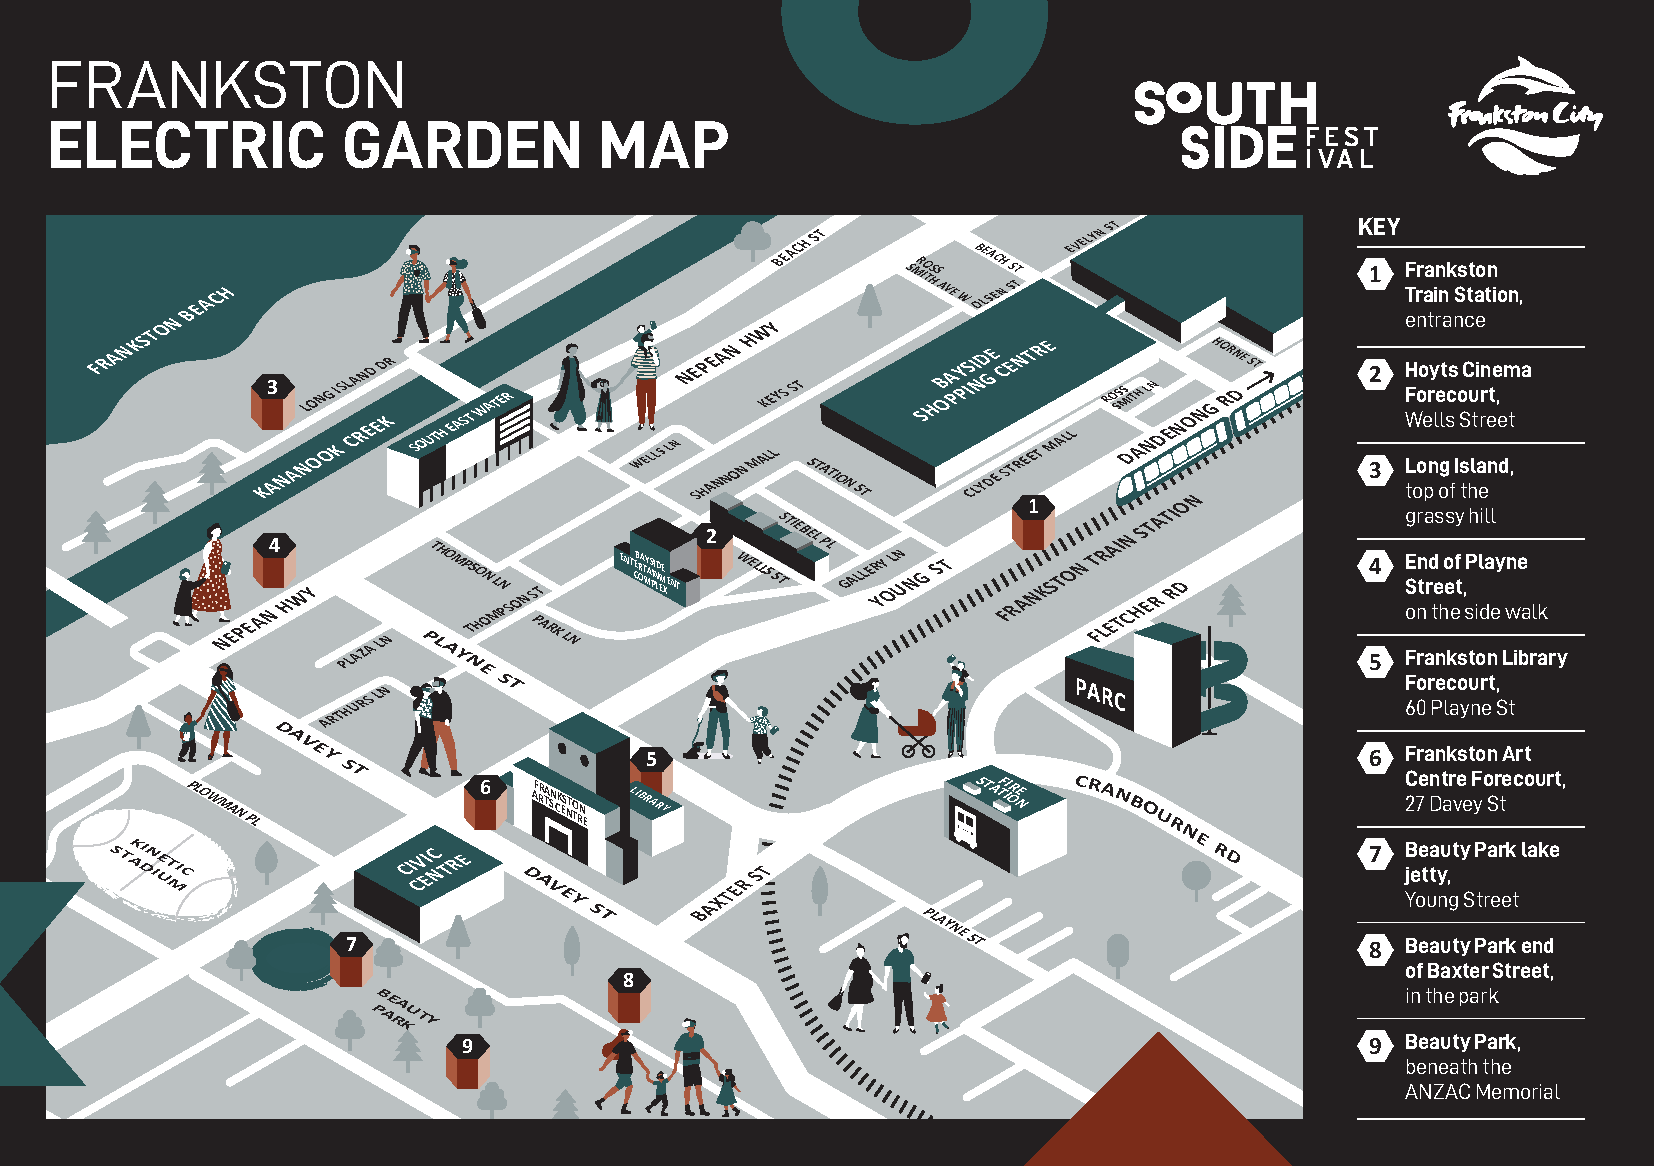 FRN2591_South-Side-Fest_Electric-Garden-Map_d2a.png